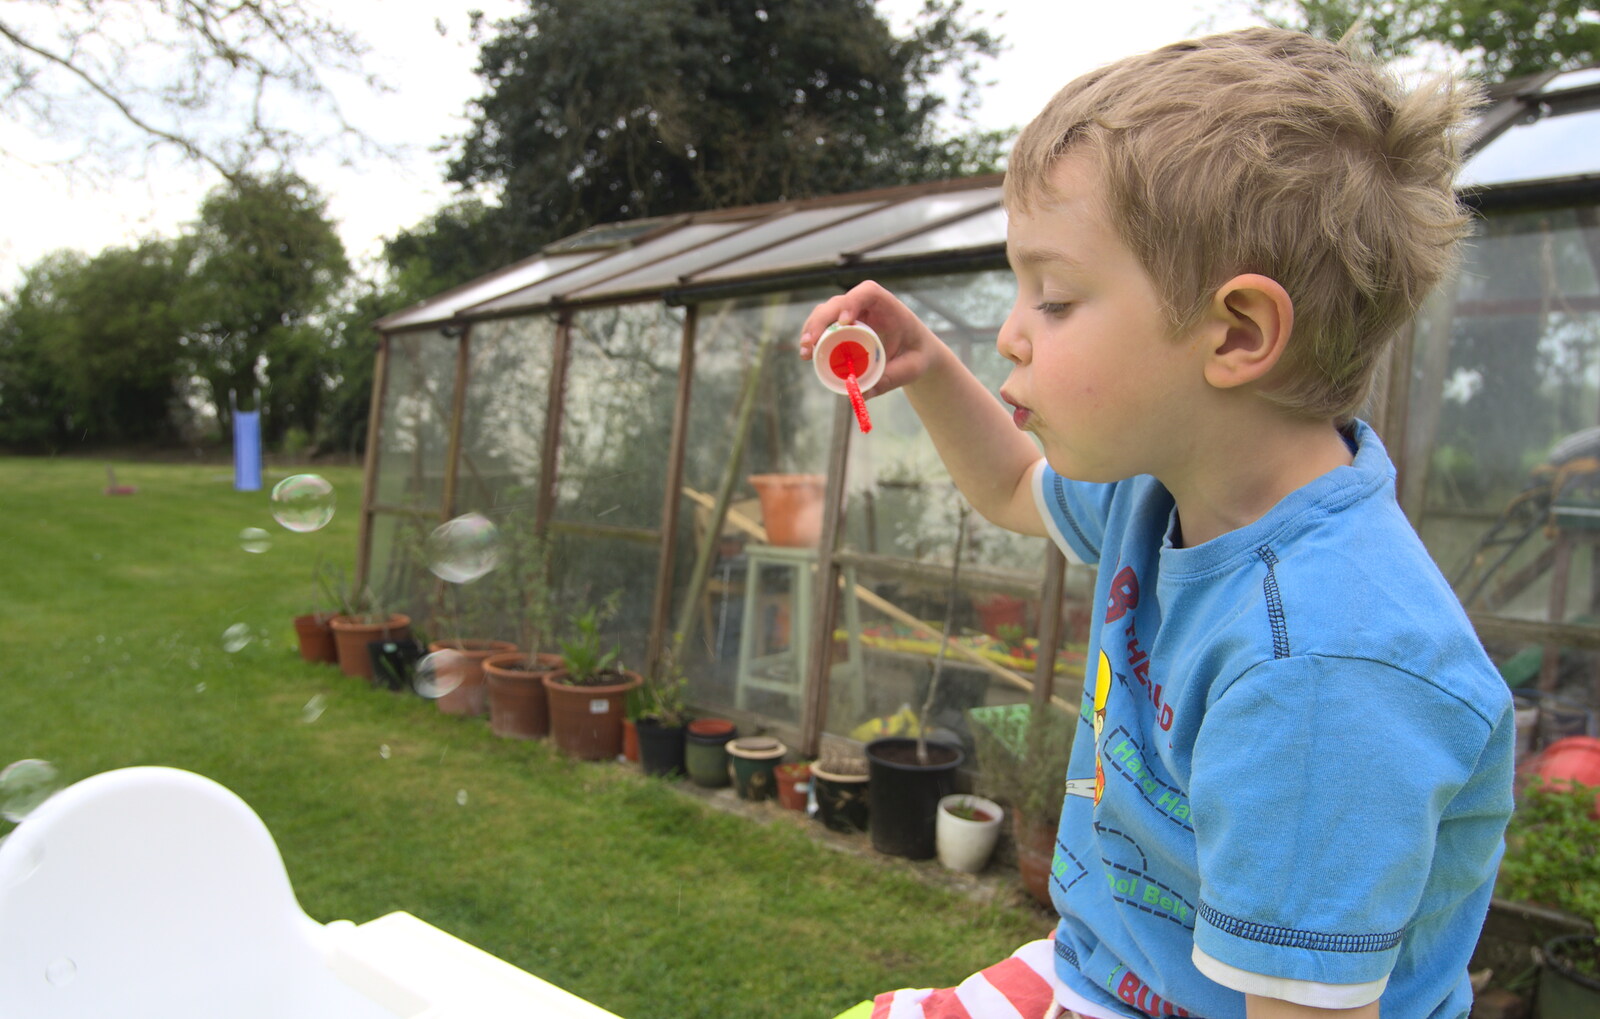 Fred blows bubbles near the greenhouse from Bank Holiday Flowers, Brome, Suffolk - 6th May 2013